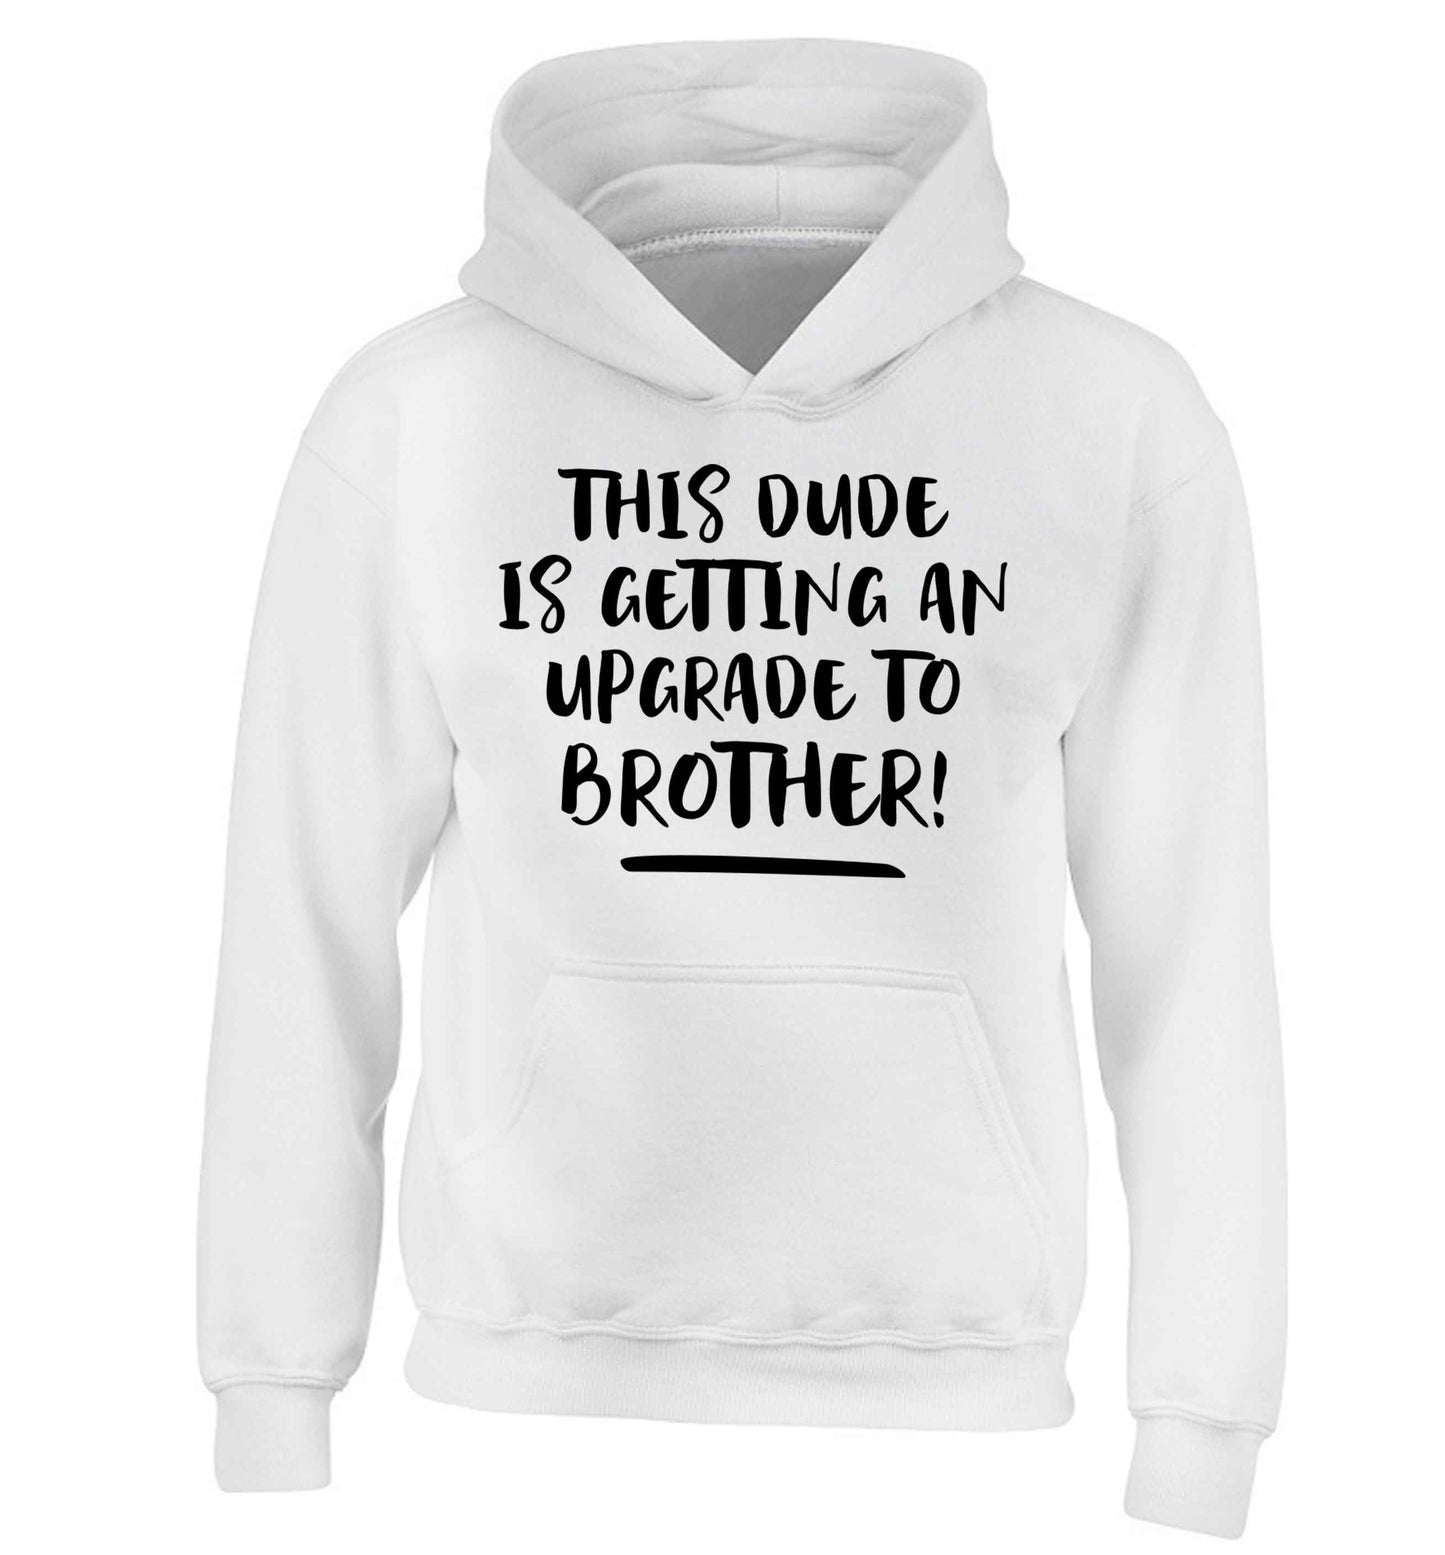 This dude is getting an upgrade to brother! children's white hoodie 12-13 Years